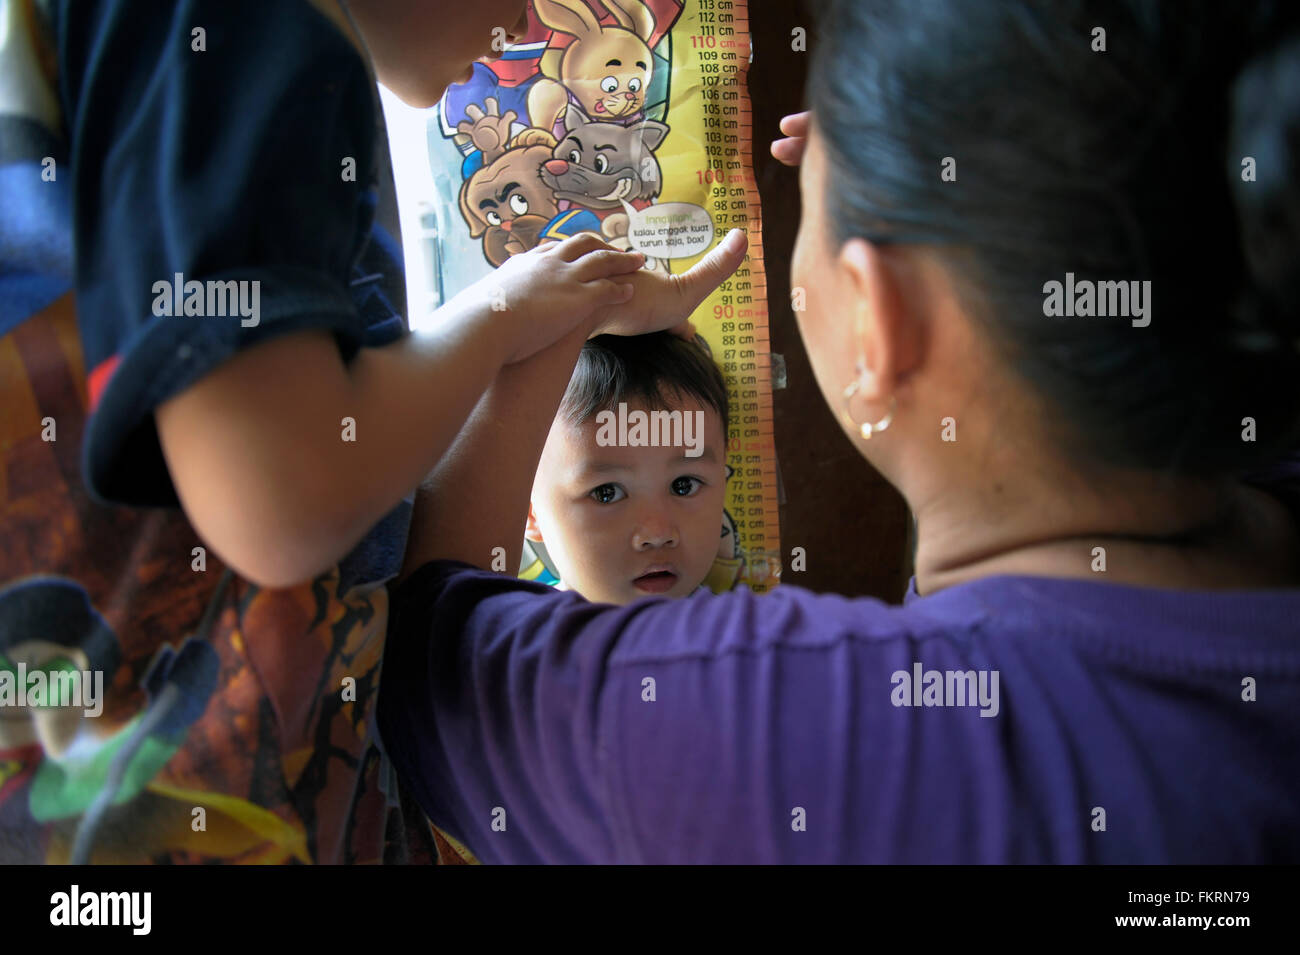 A woman measuring a boy's height. After being declared polio-free by World Health Organization officials in 2014, Indonesia is observing National Polio Immunization Week by vowing to inoculate millions of children. The expanded mass immunization drive against polio and measles began simultaneously. The polio immunization drive is targeting children aged 9 to 59 months old, and that for measles infants nine month to 59 month old. (Photo by Agung Samosir / Pacific Press) Stock Photo